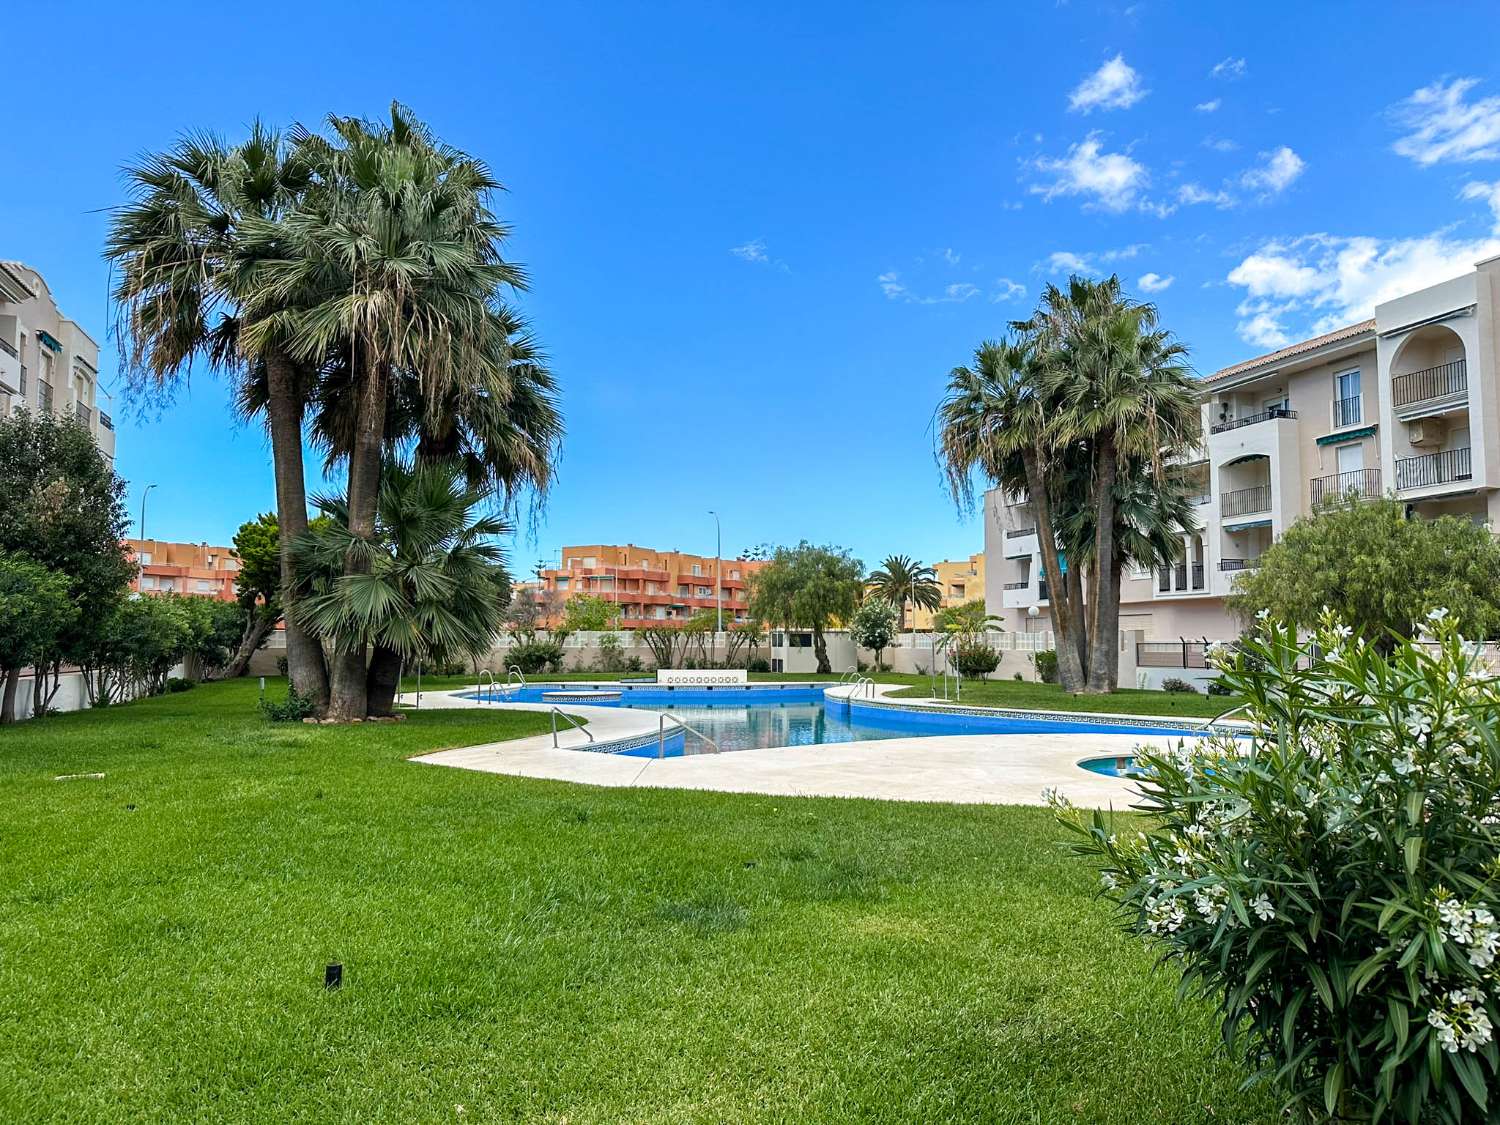 Apartment for sale on the beach of Salobrena